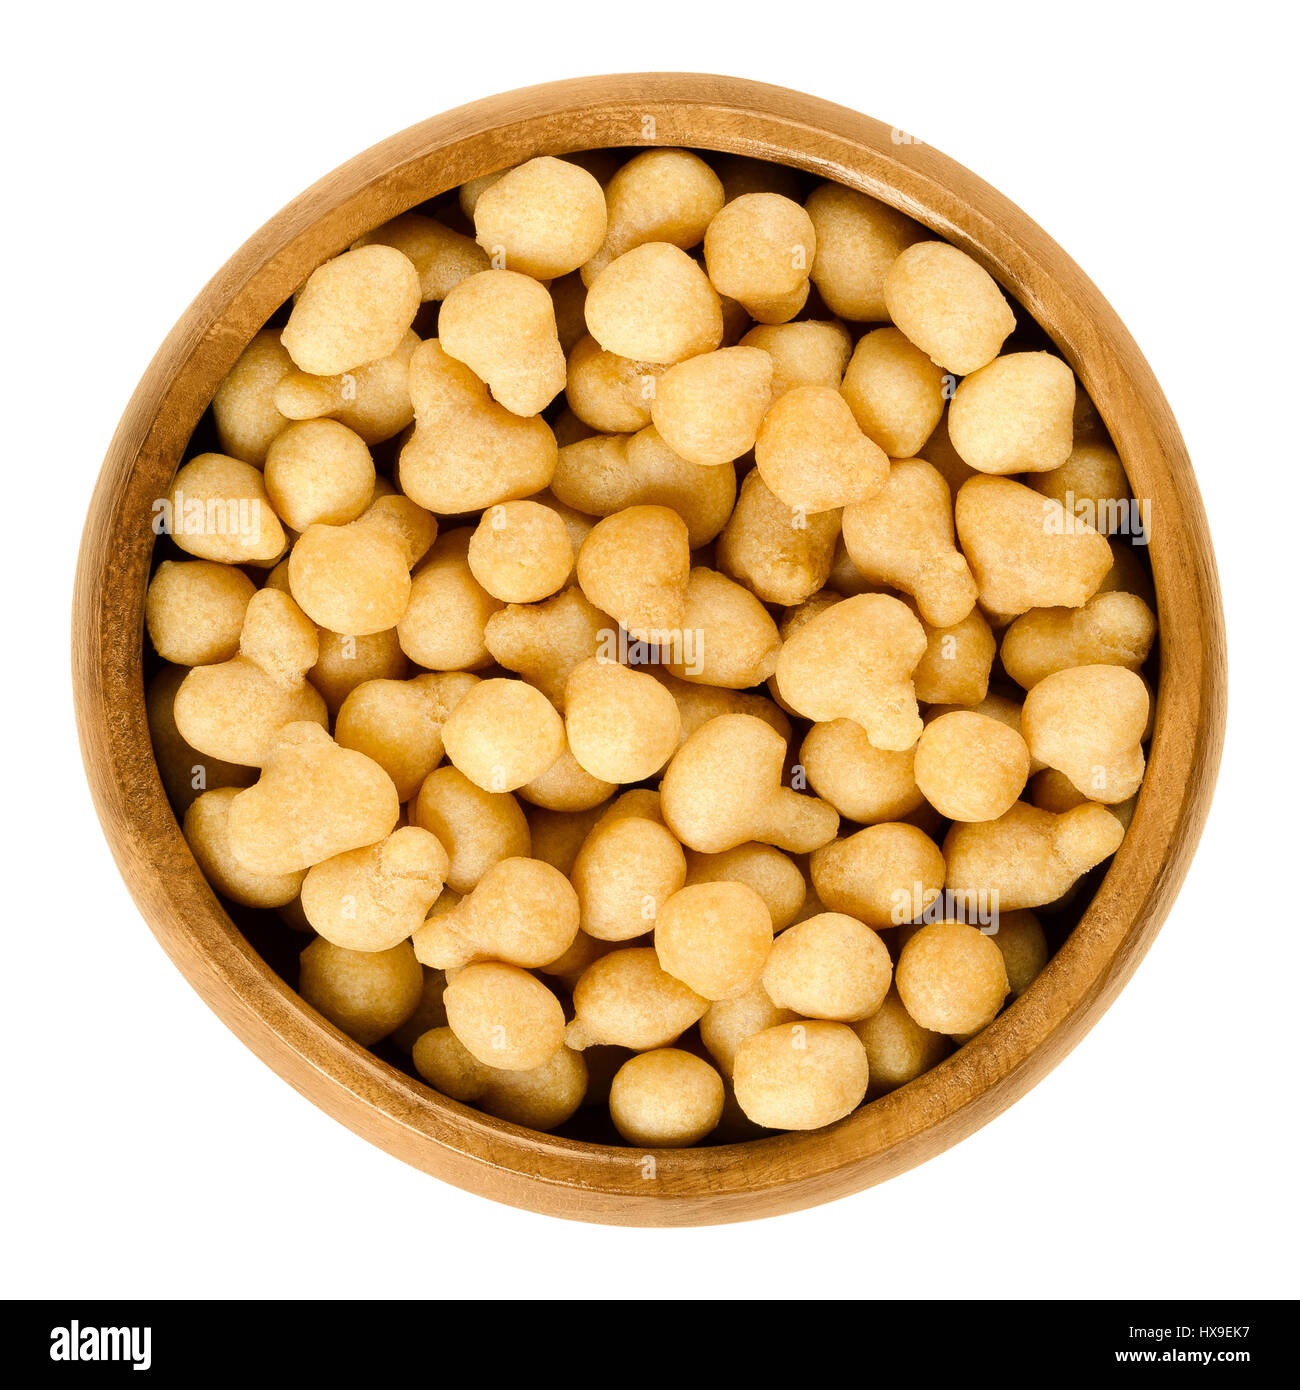 Fried batter pearls in a wooden bowl. Crispy pearls. A soup topping and snack product made from flour, vegetable fat and yeast. Isolated macro photo. Stock Photo